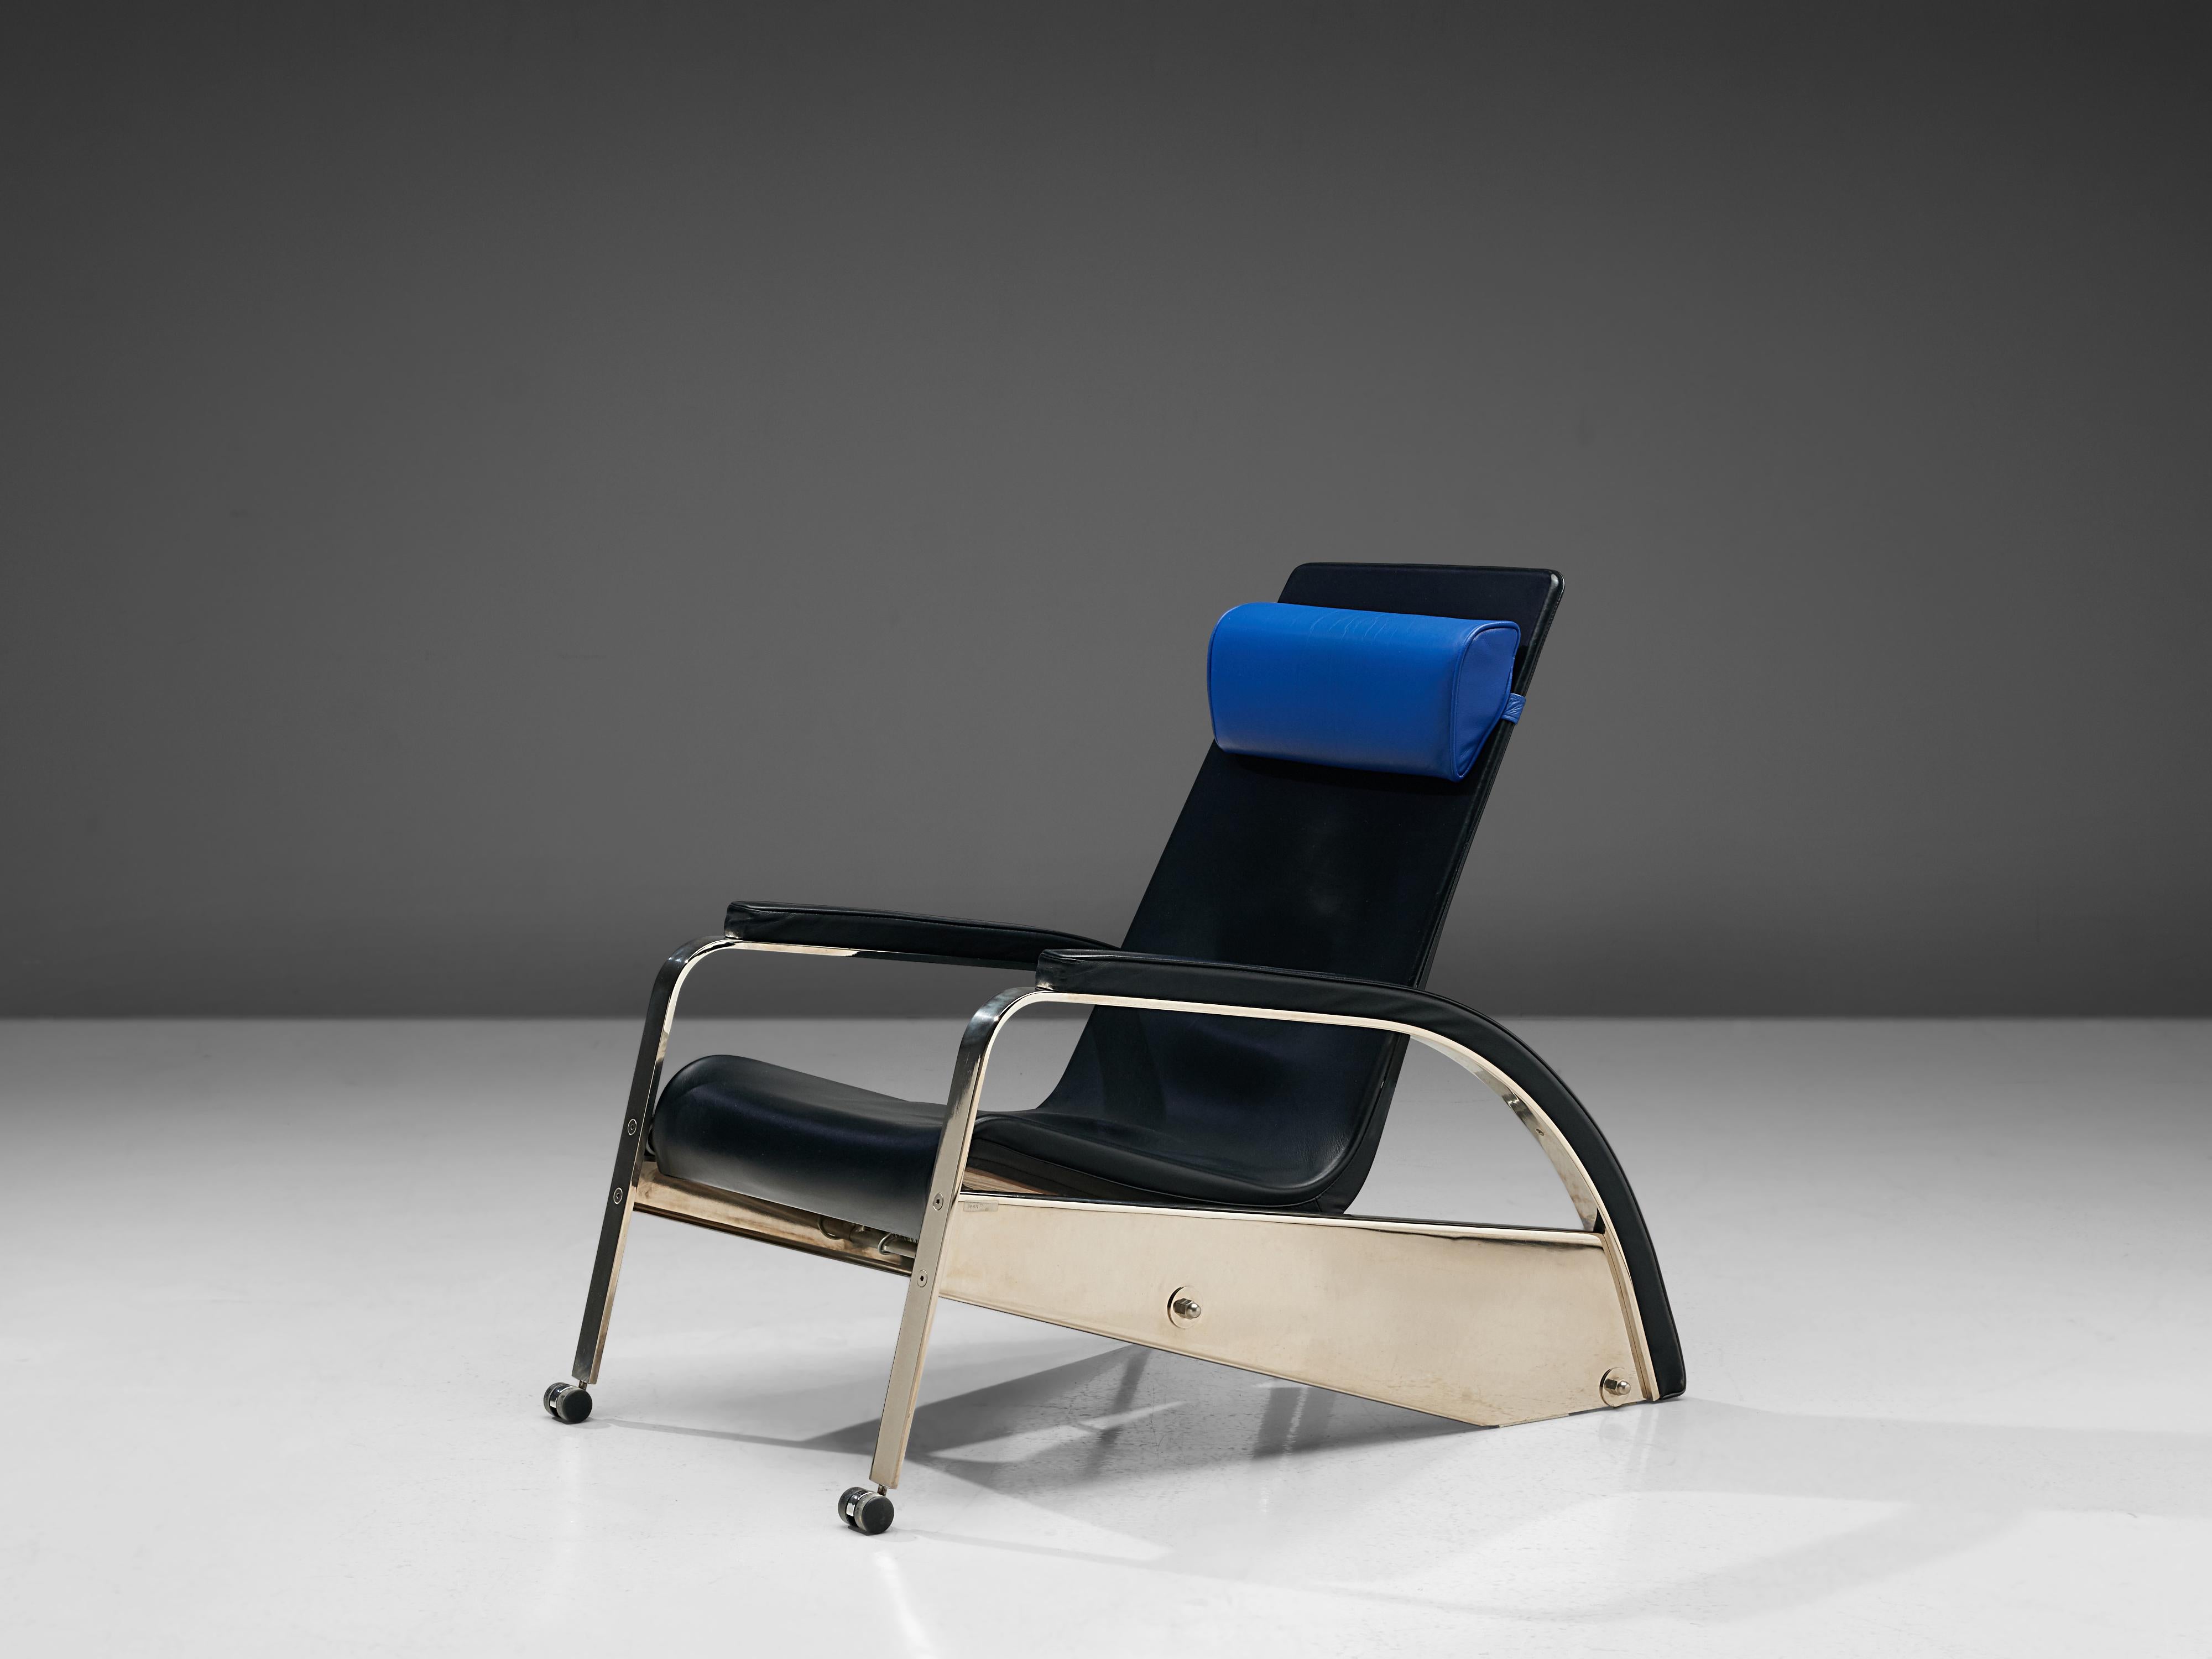 Jean Prouvé, easy chair for Tecta, in leather and chrome, France, 1980. 

Sleek, stylish and modern. Of this rare chair designed by Jean Prouvé, only 100 pieces were produced. In the 1980s this chair went into reproduction by Tecta. The chair is